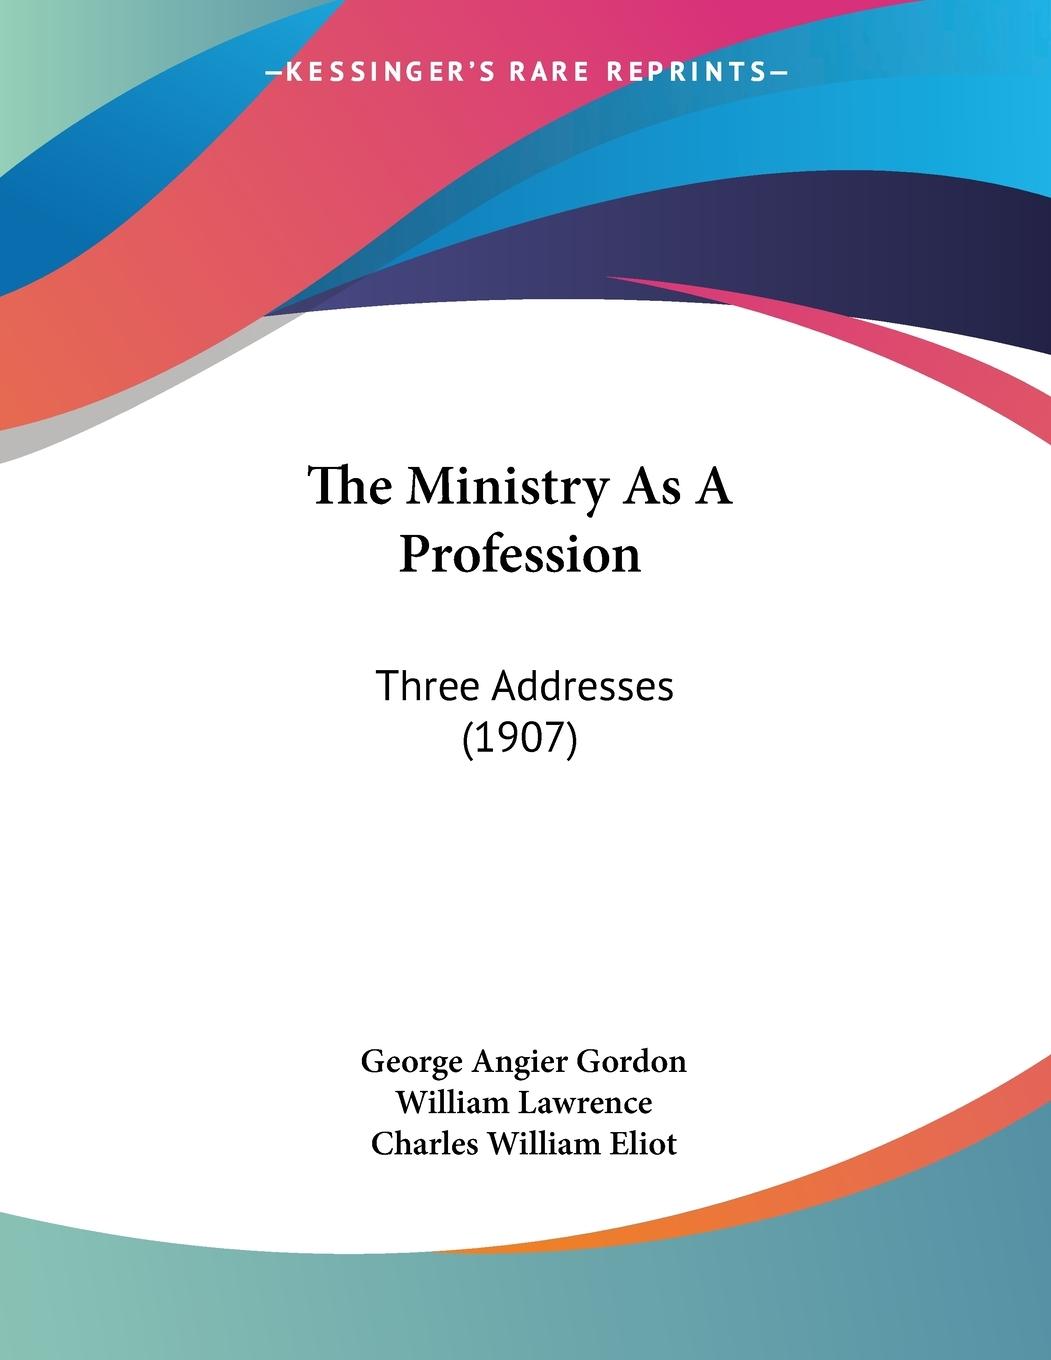 The Ministry As A Profession - Gordon, George Angier Lawrence, William Eliot, Charles William